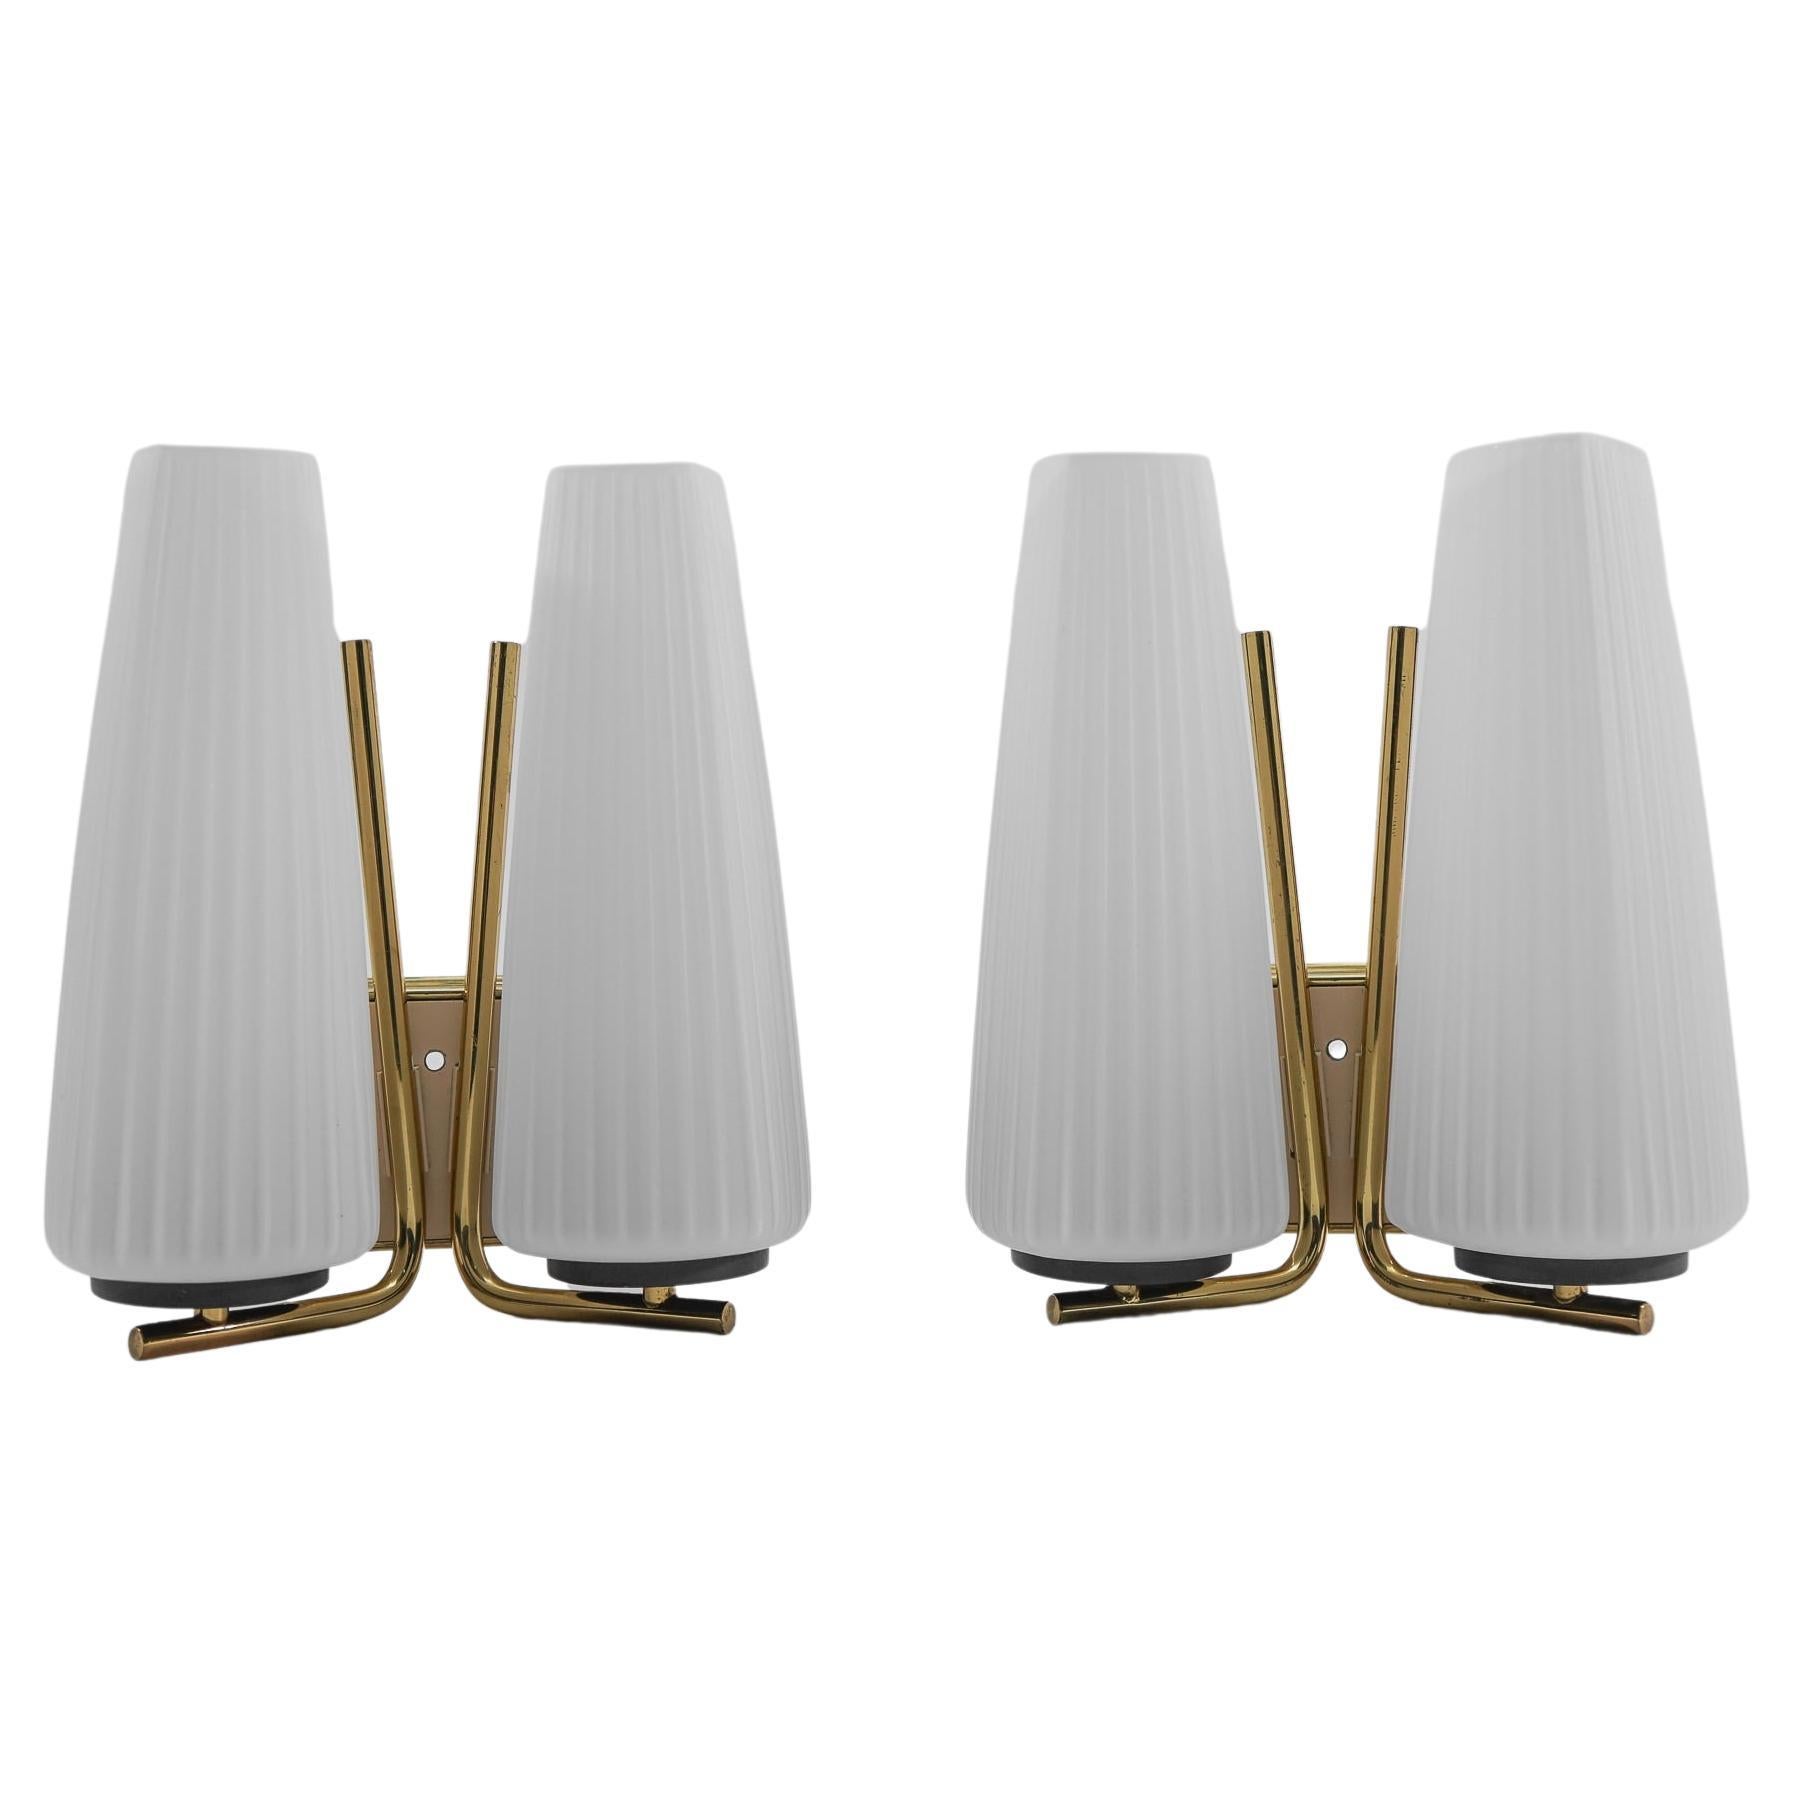 Pair of Wonderful Mid-Century Modern Double Wall Lamps in Brass and Opal Glass For Sale